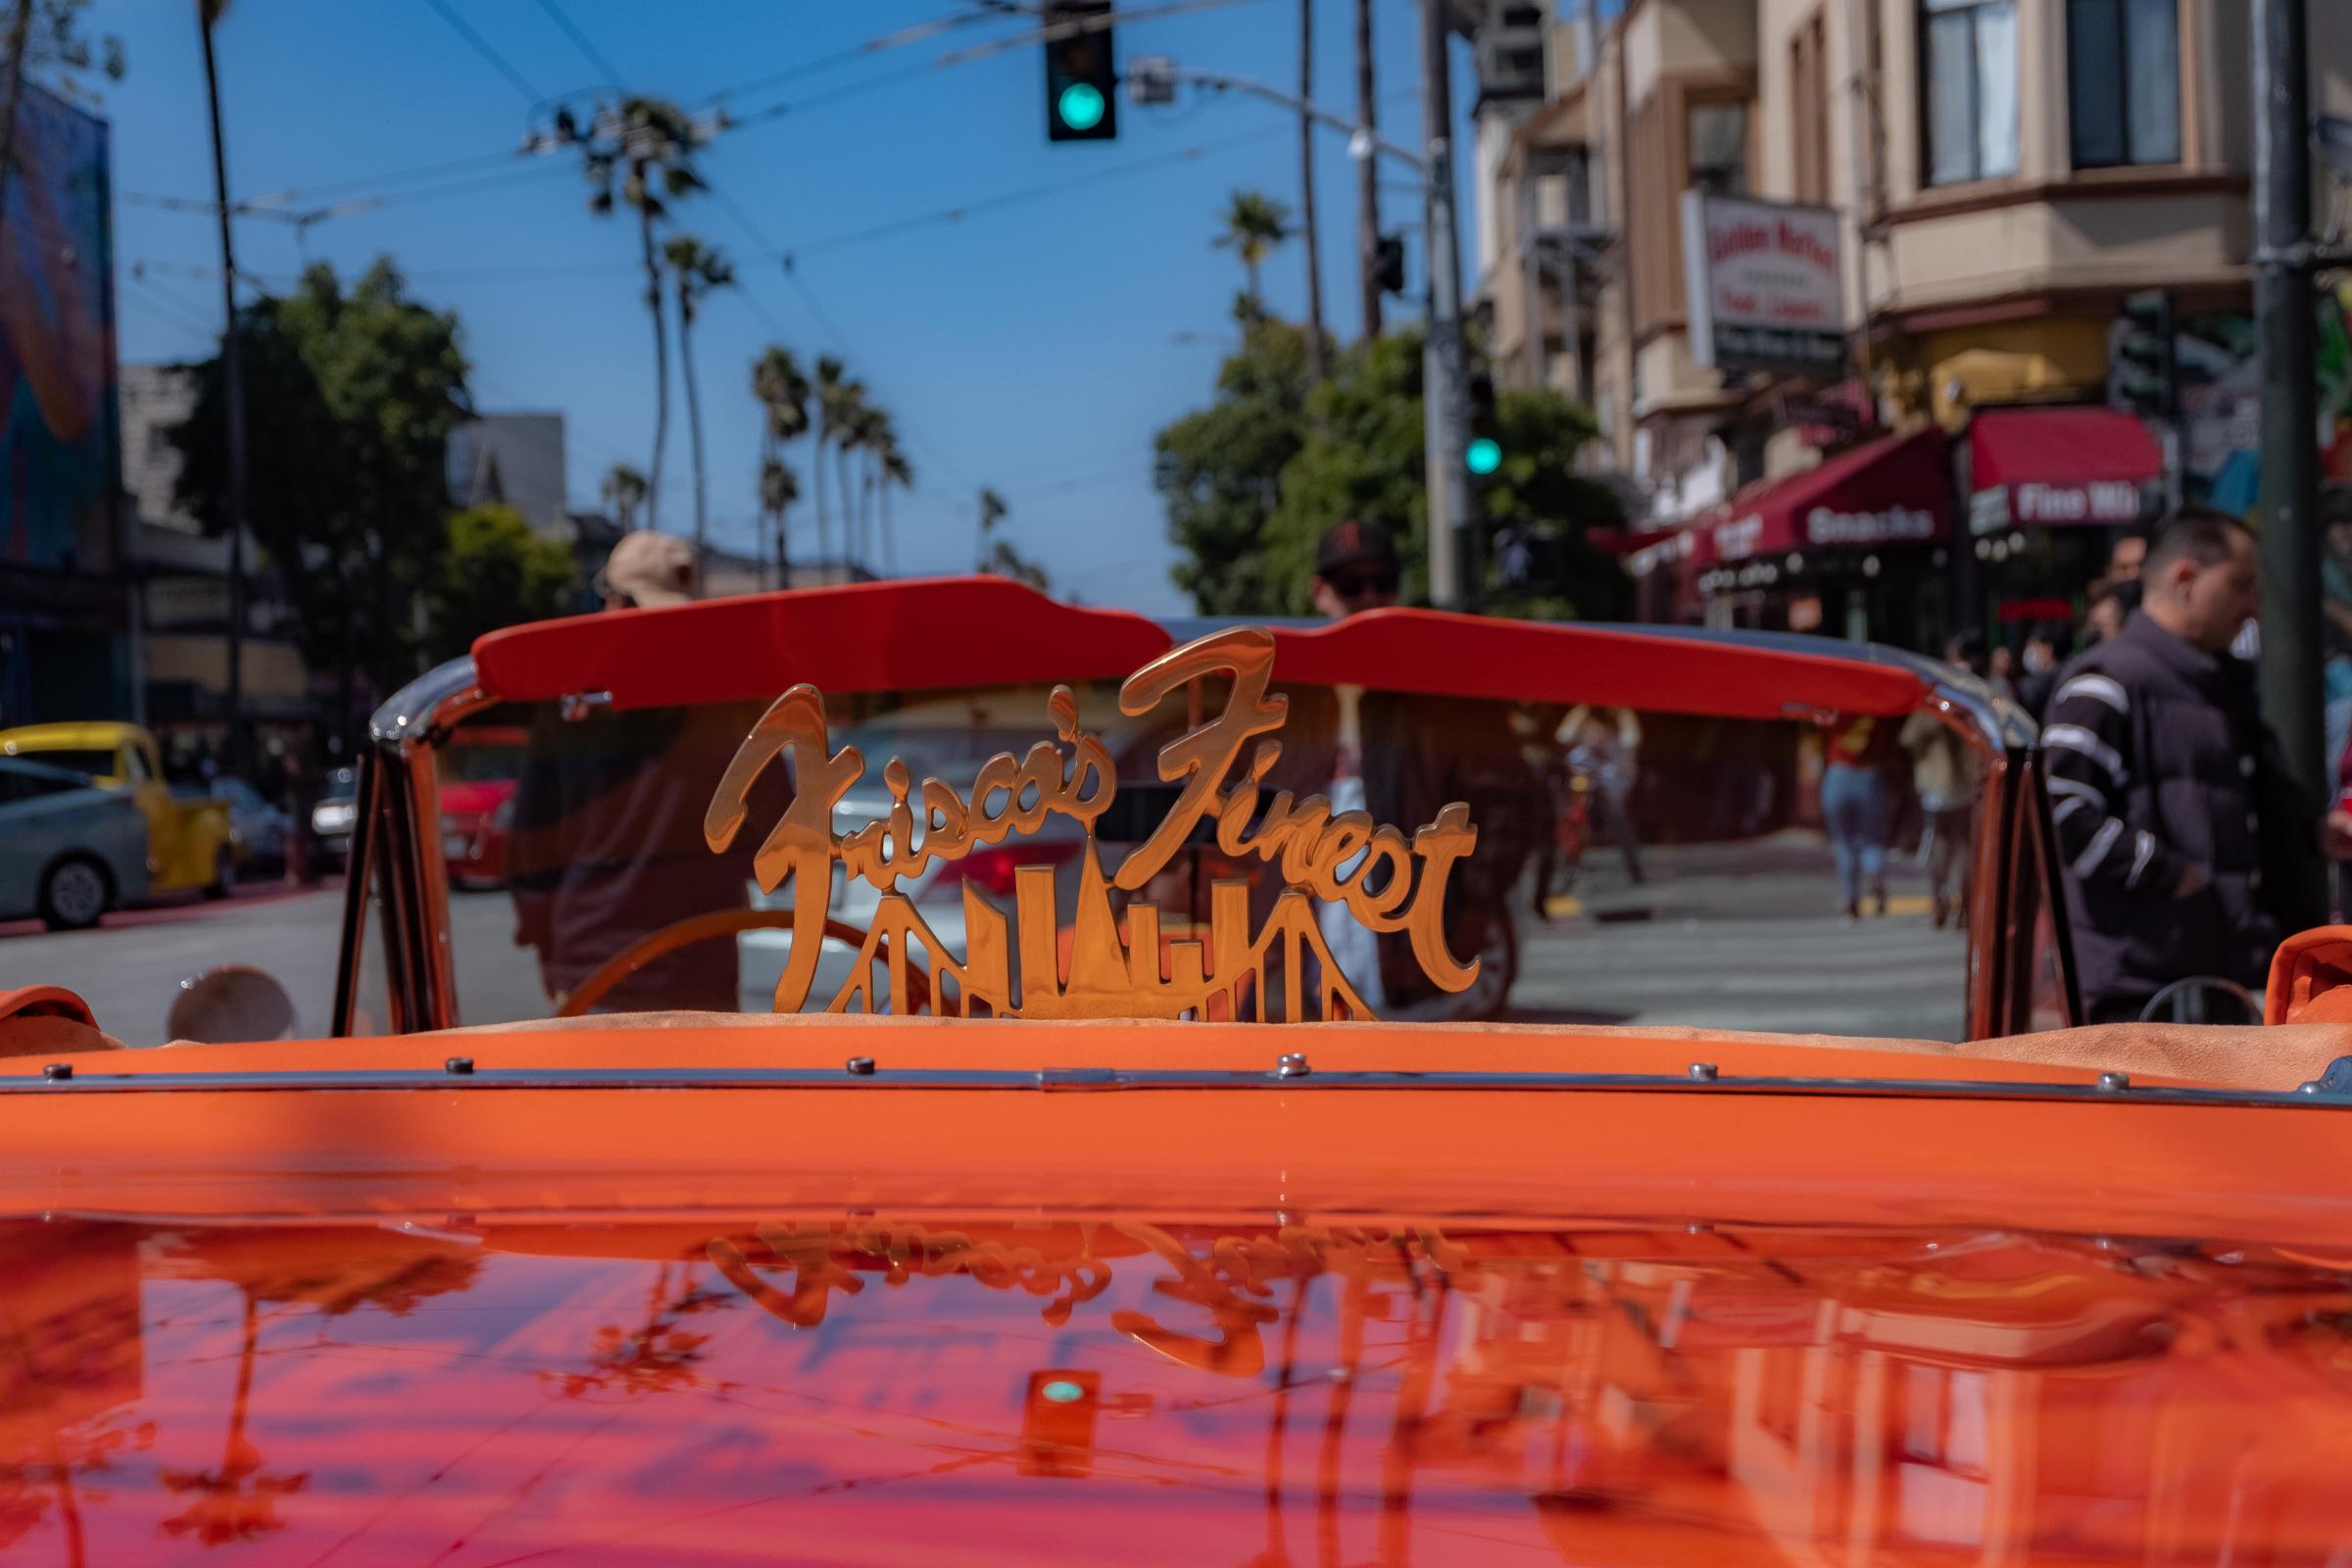  A &ldquo;Frisco&rsquo;s Finest&rdquo; sign stands out on the back of an orange lowrider parked on Mission street during the event...